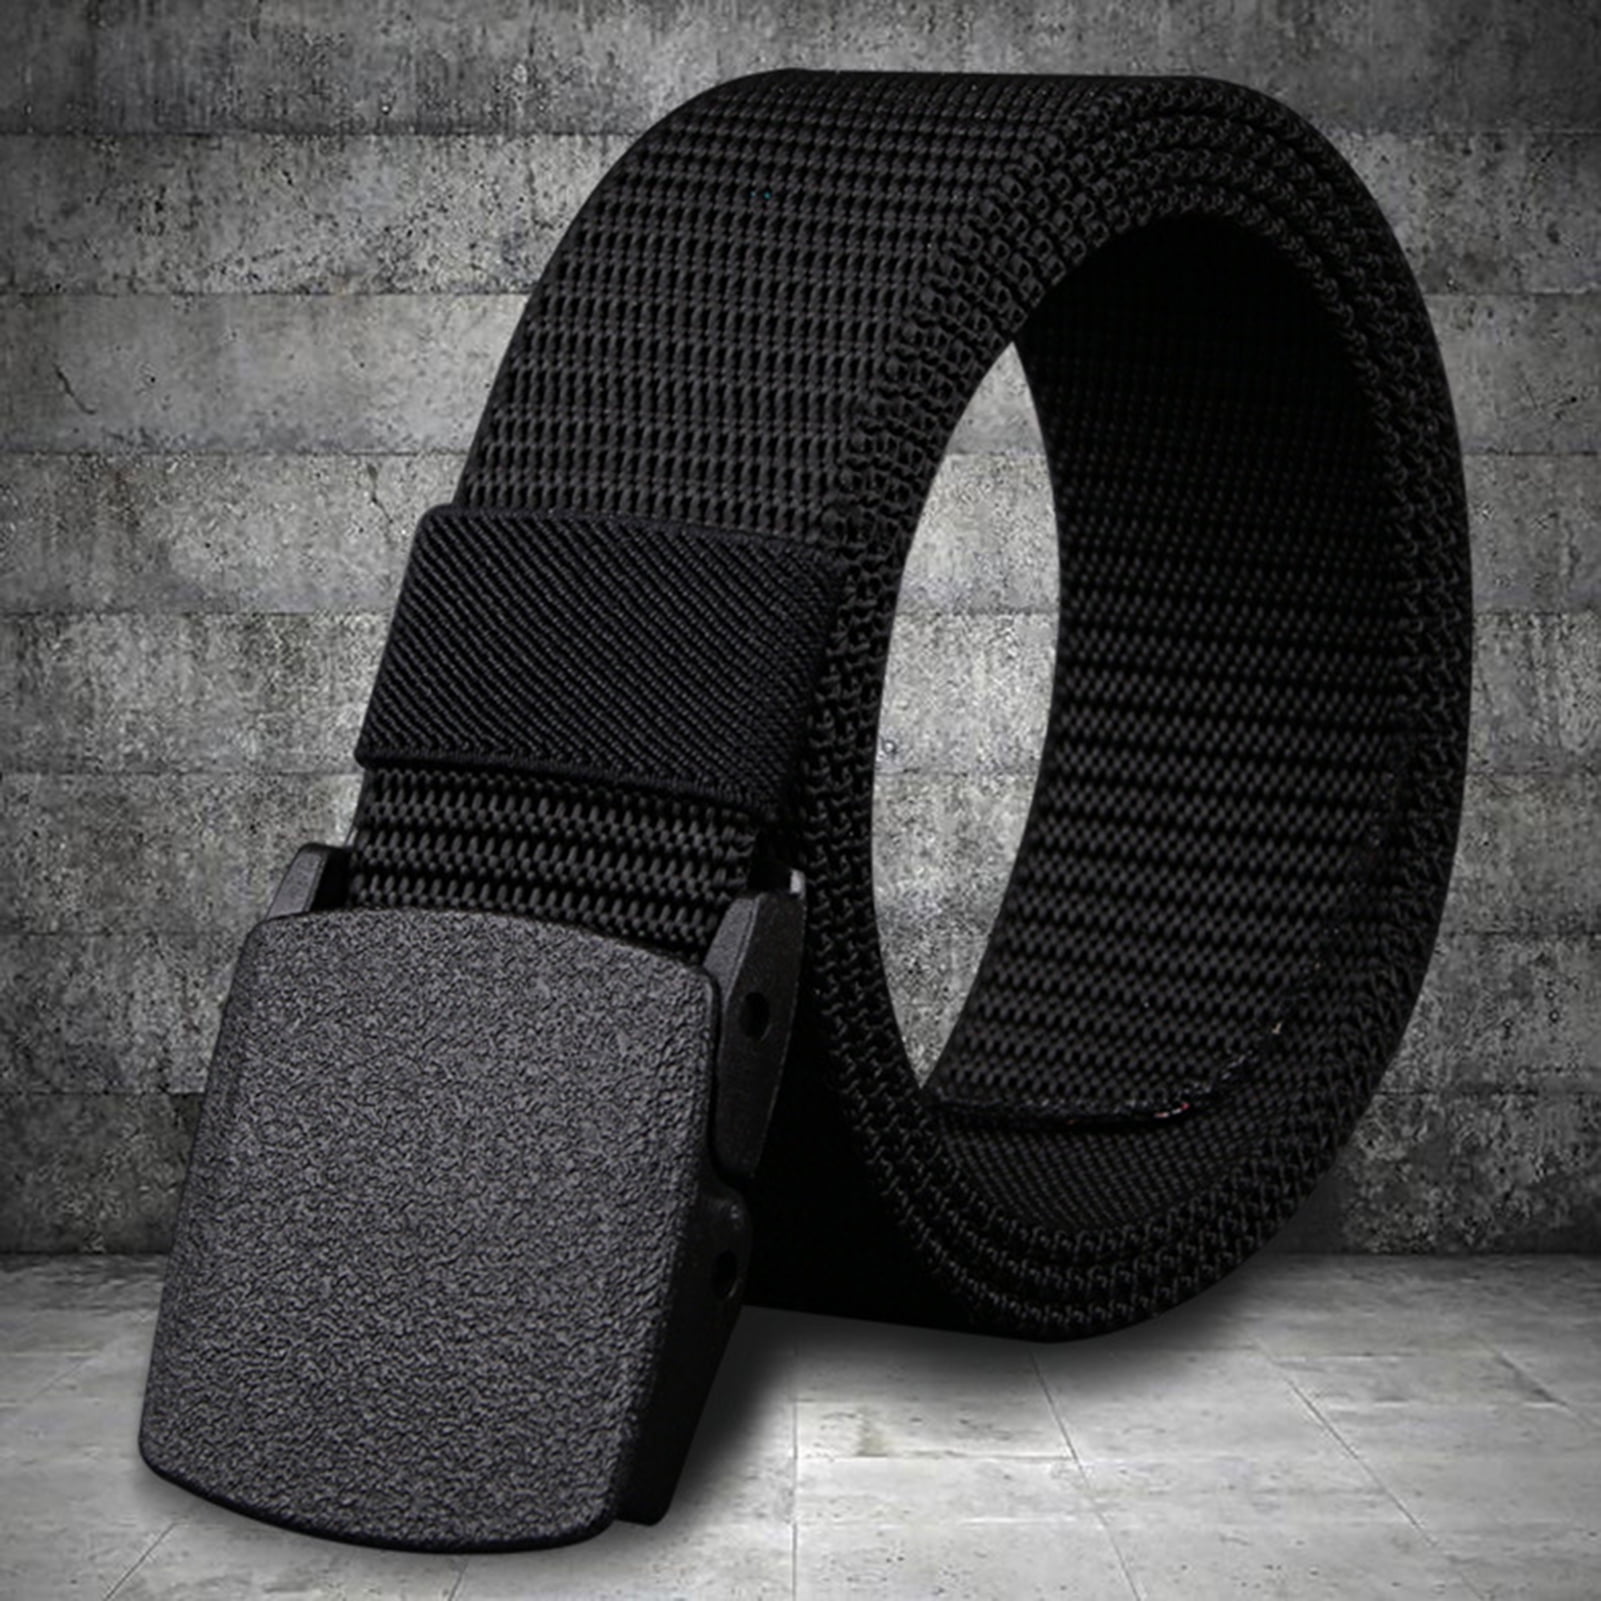 130cm Men Army Belts Military Nylon Adjustable Belt Outdoor Travel Hunting  Tactical Waist Belt with Plastic Buckle For Pants _ - AliExpress Mobile